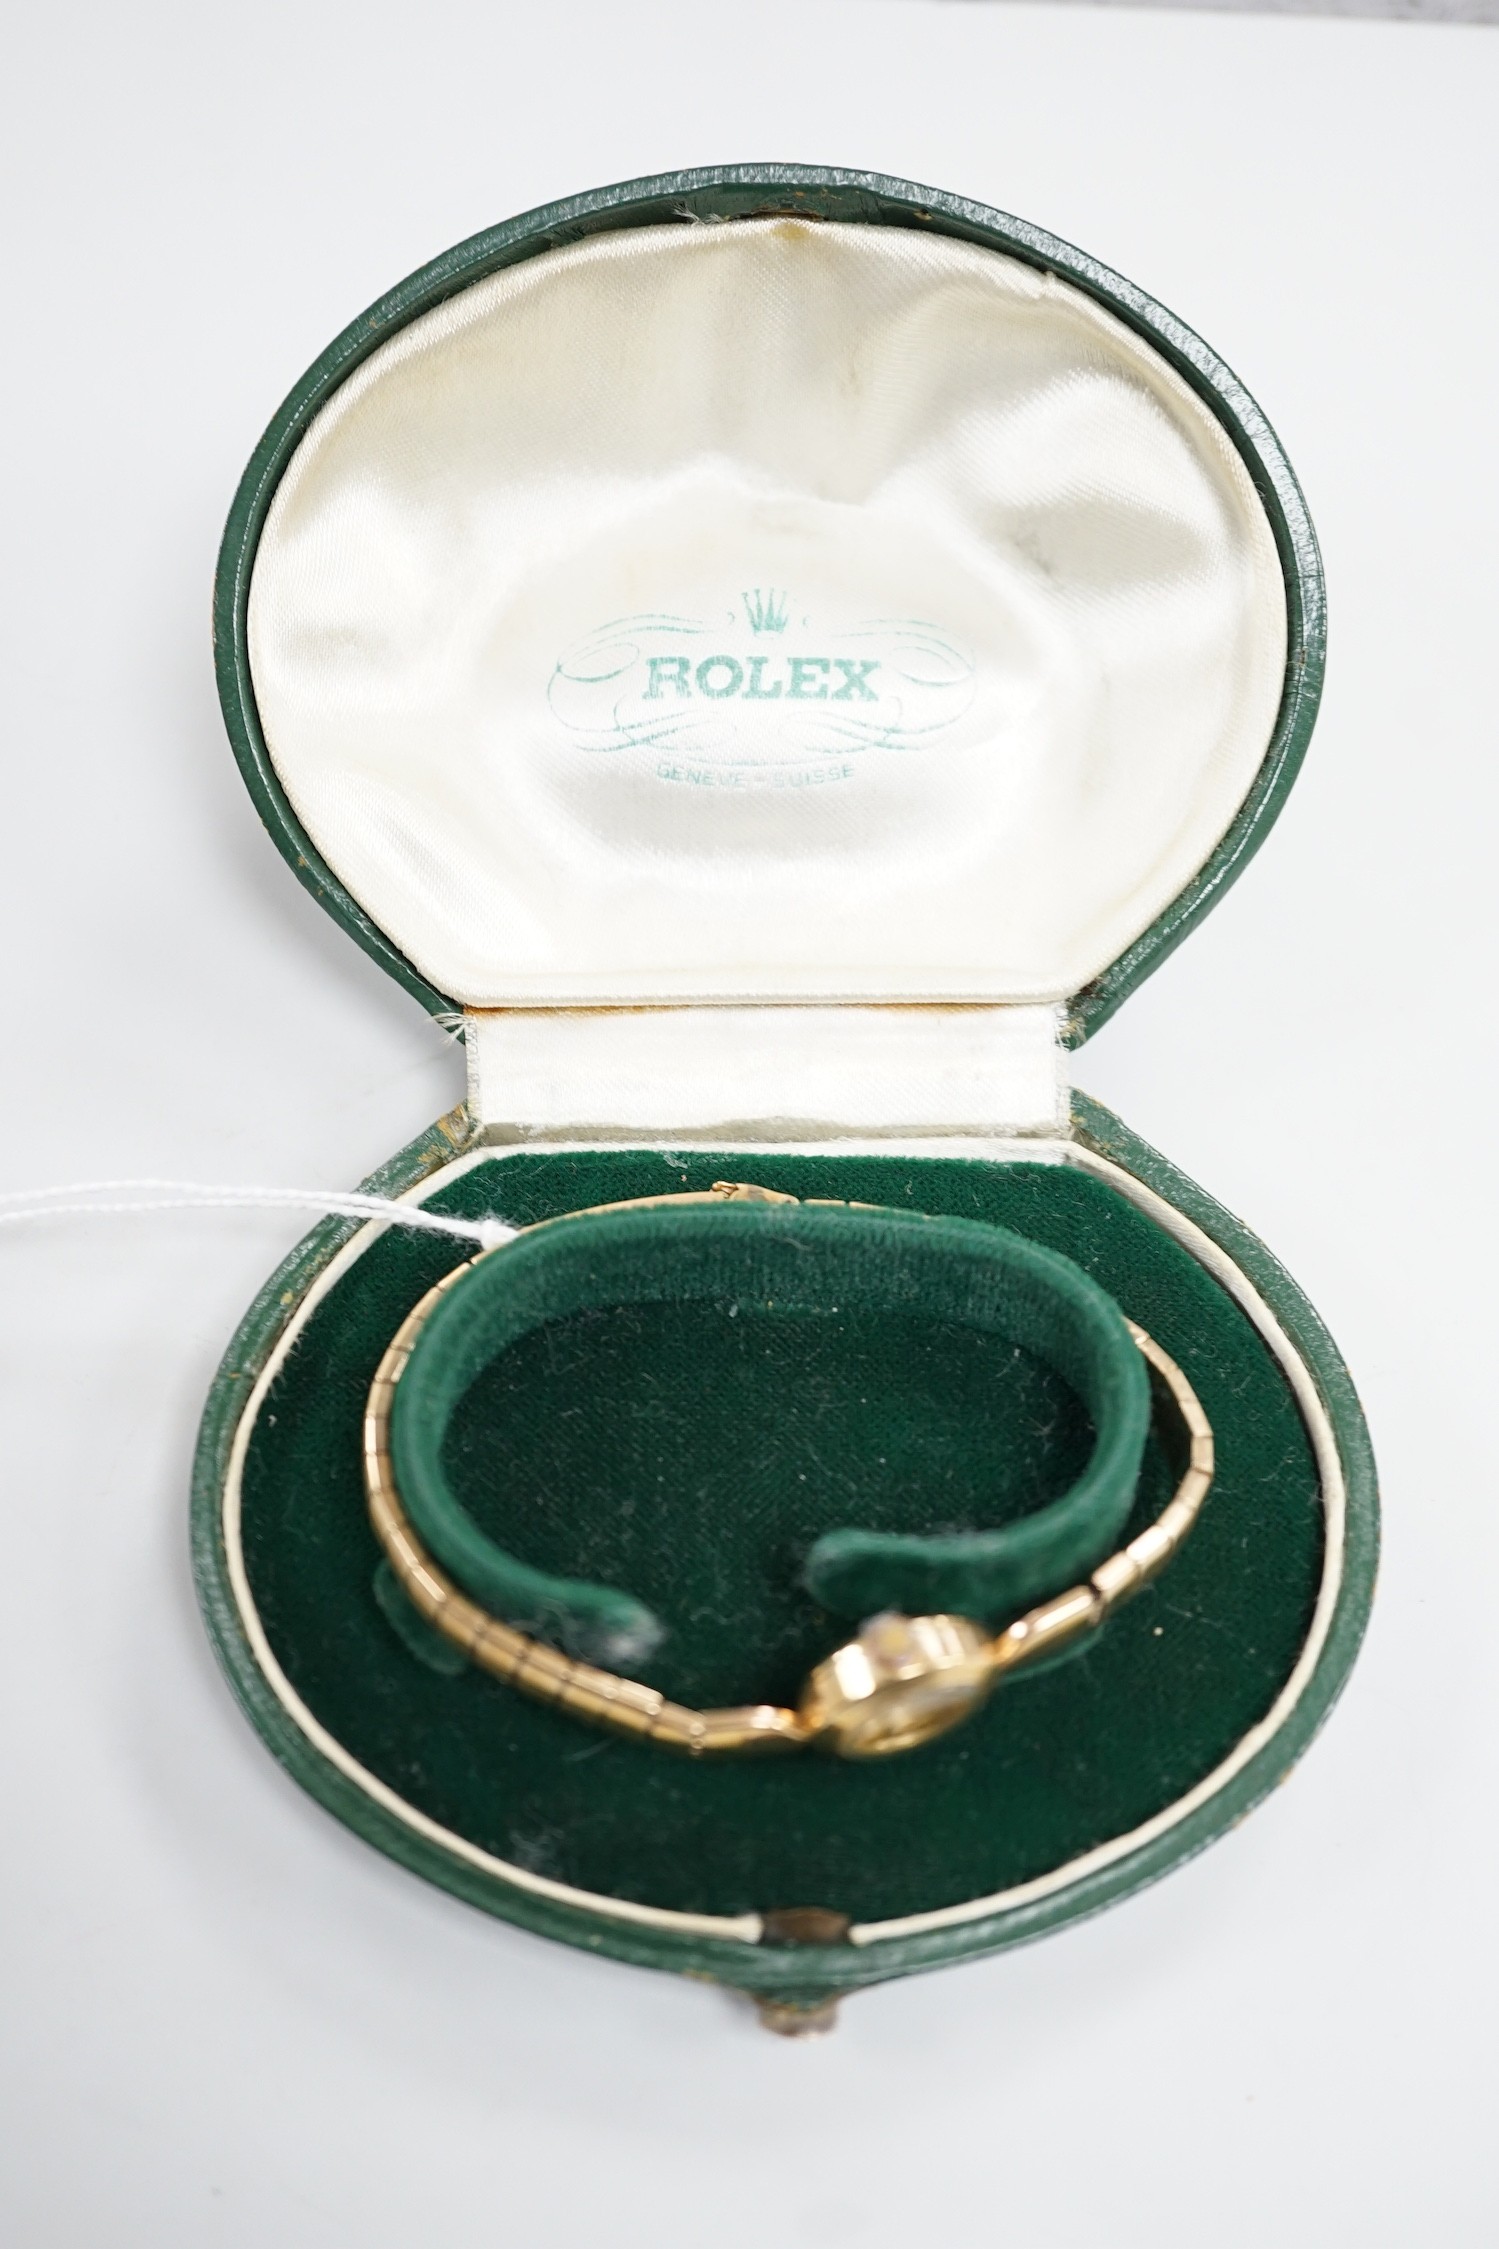 A lady's 9ct gold Rolex Precision manual wind wrist watch, on 9ct gold Rolex bracelet, case diameter 16mm, gross weight 16.8 grams, with Rolex box.